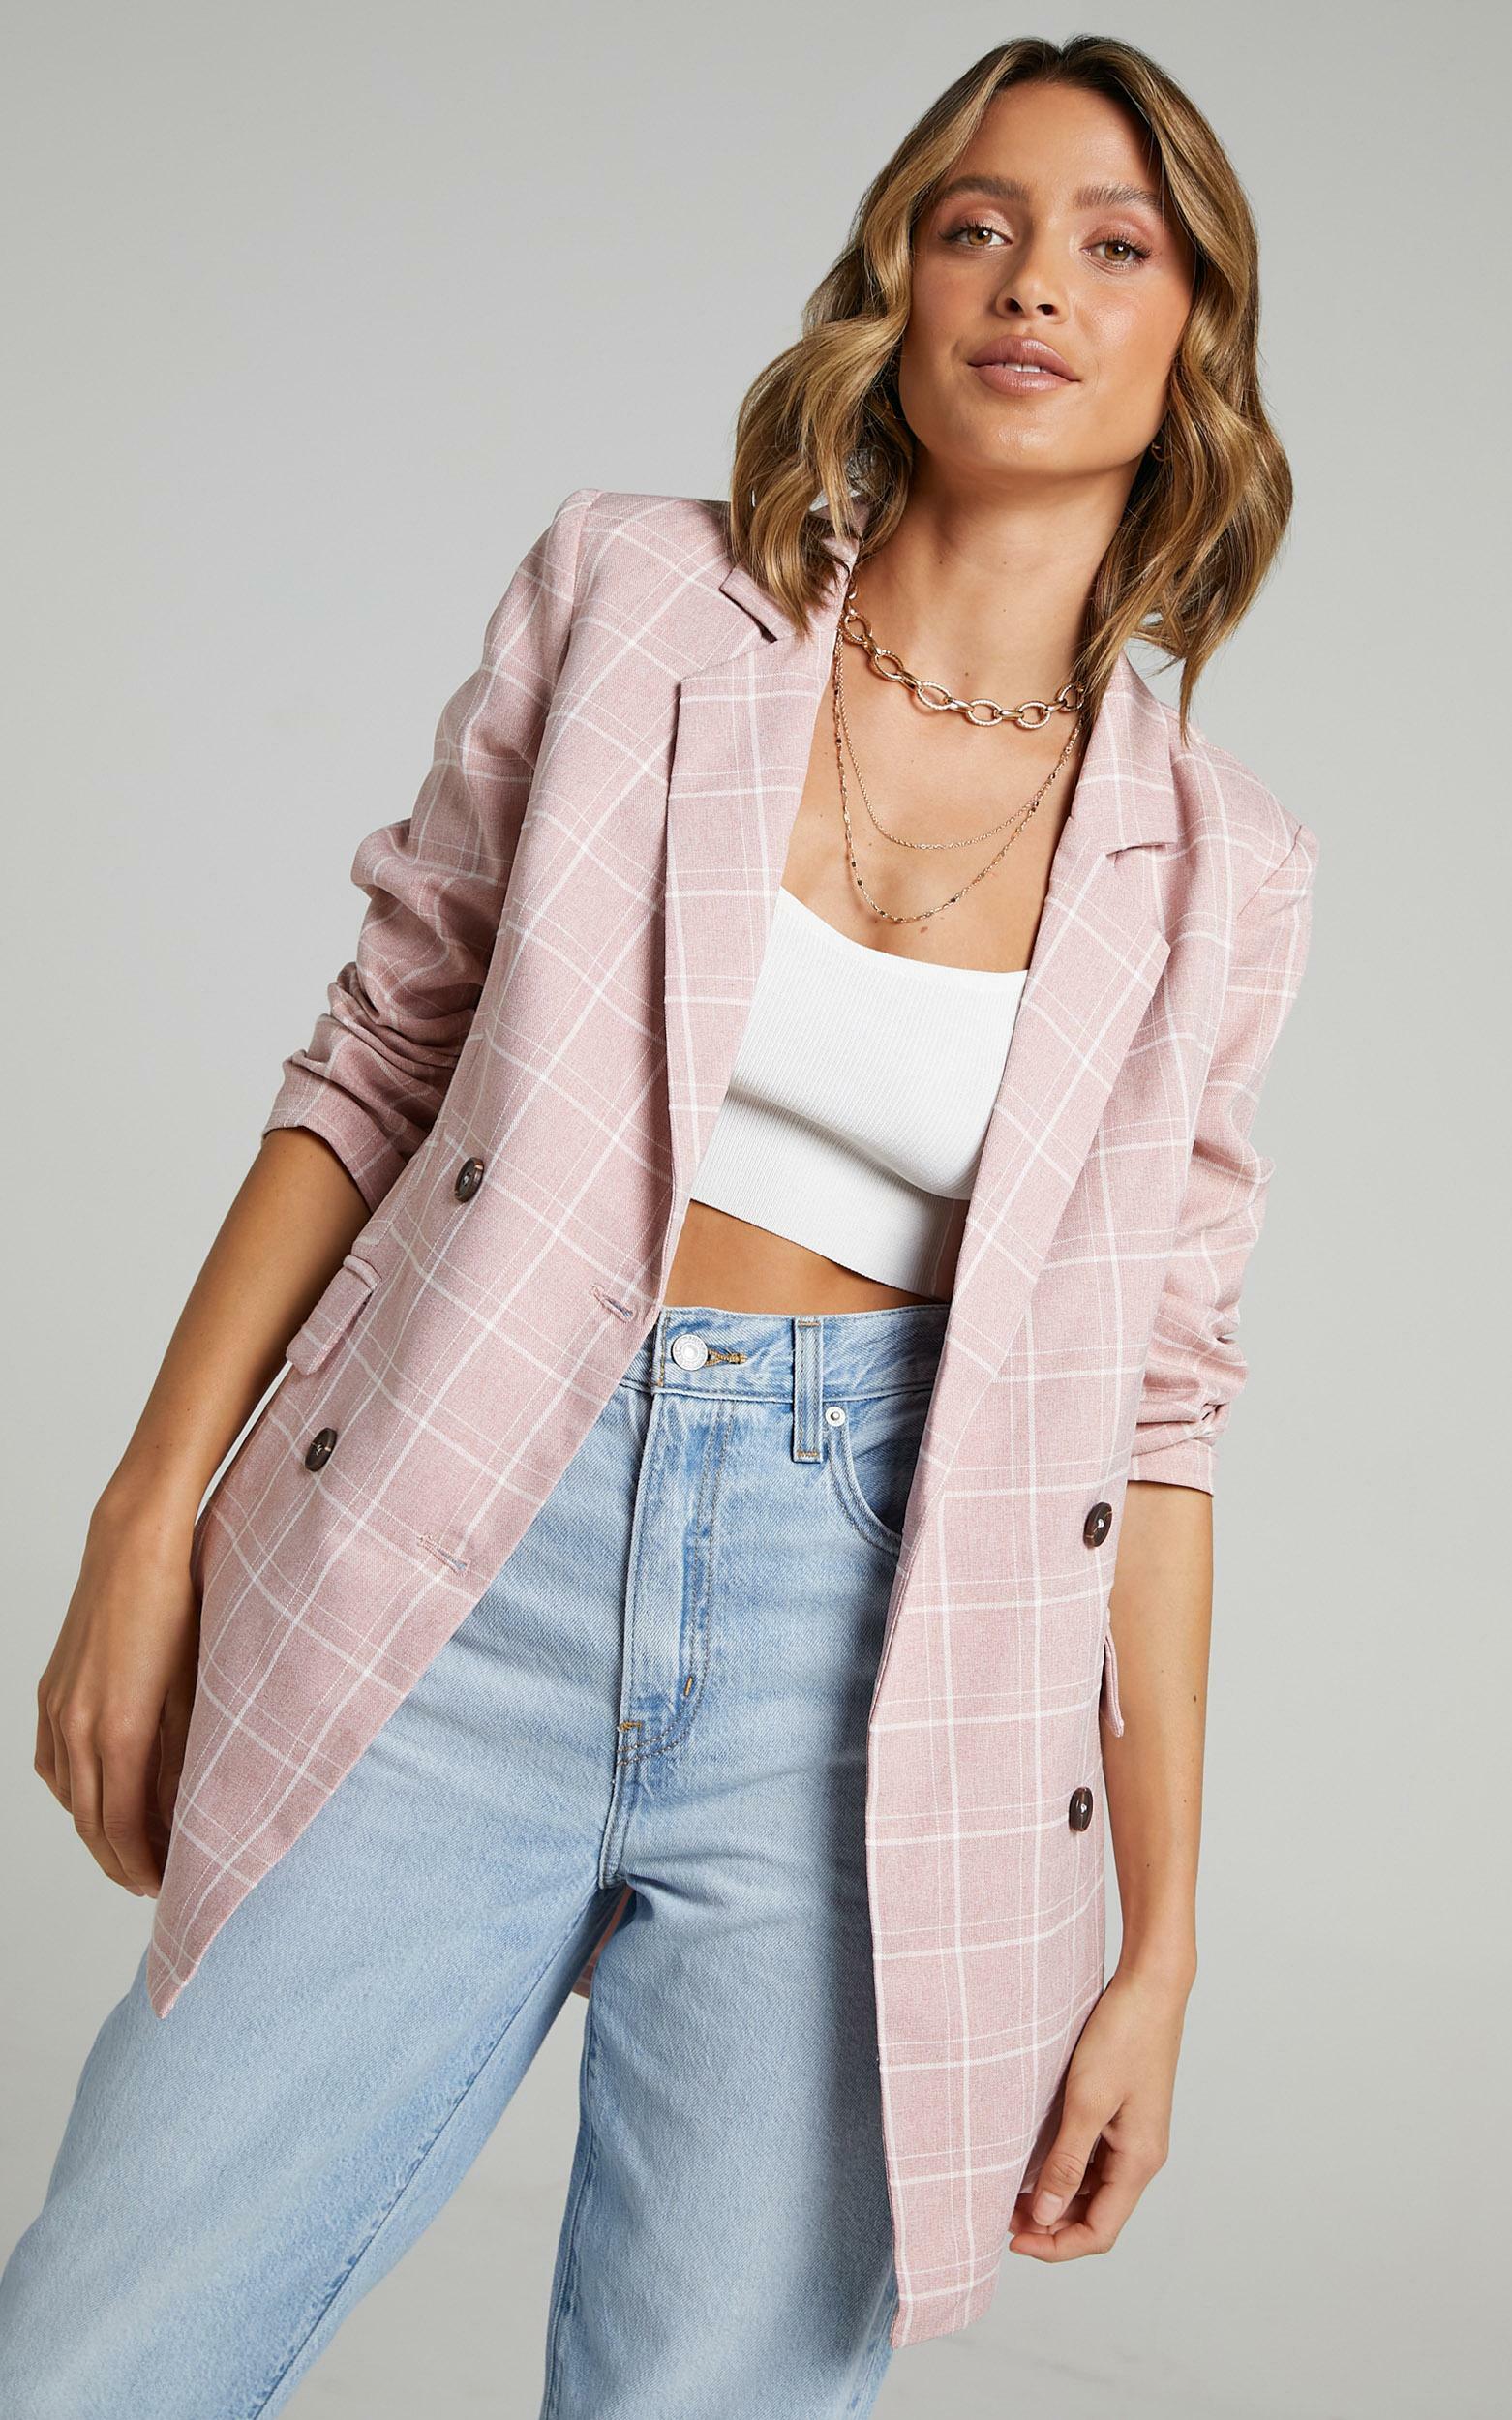 Sort It Out Blazer in Blush Check - 04, PNK3, hi-res image number null